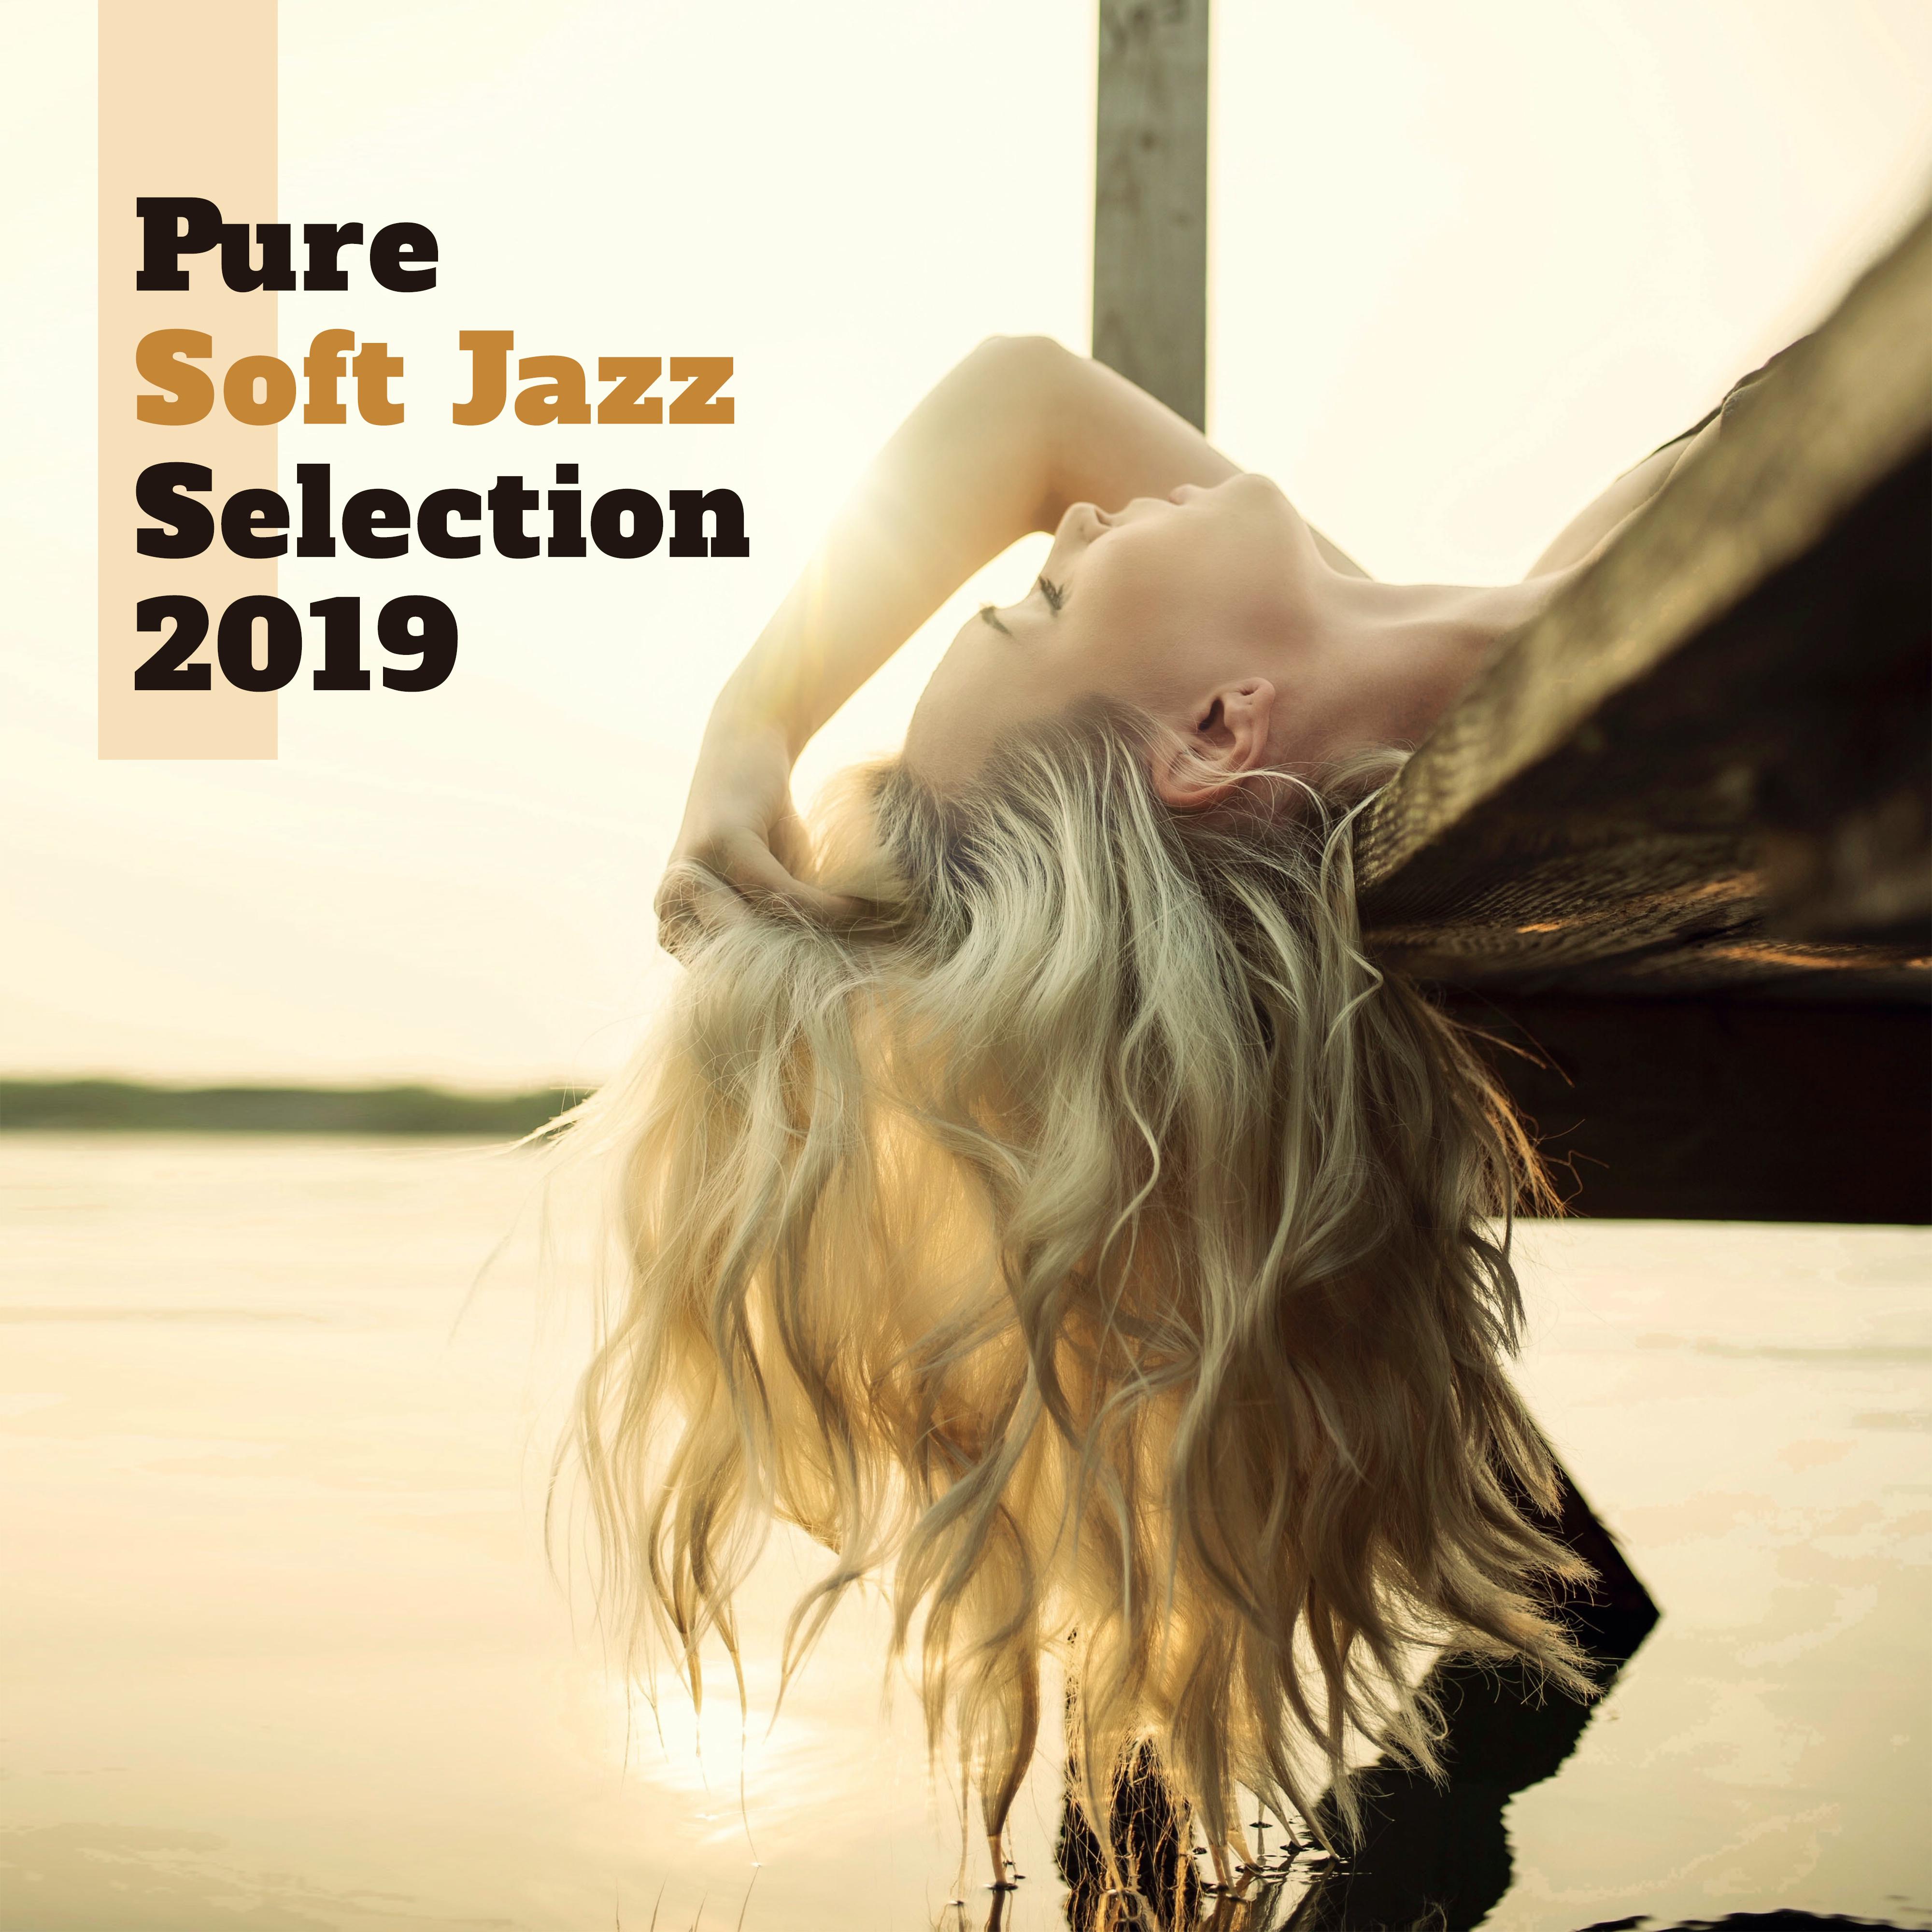 Pure Soft Jazz Selection 2019 – Best instrumental Smooth Jazz Music Compilation of Relaxation Songs, Vintage Happy Rhythms to Calming Down & De-stress